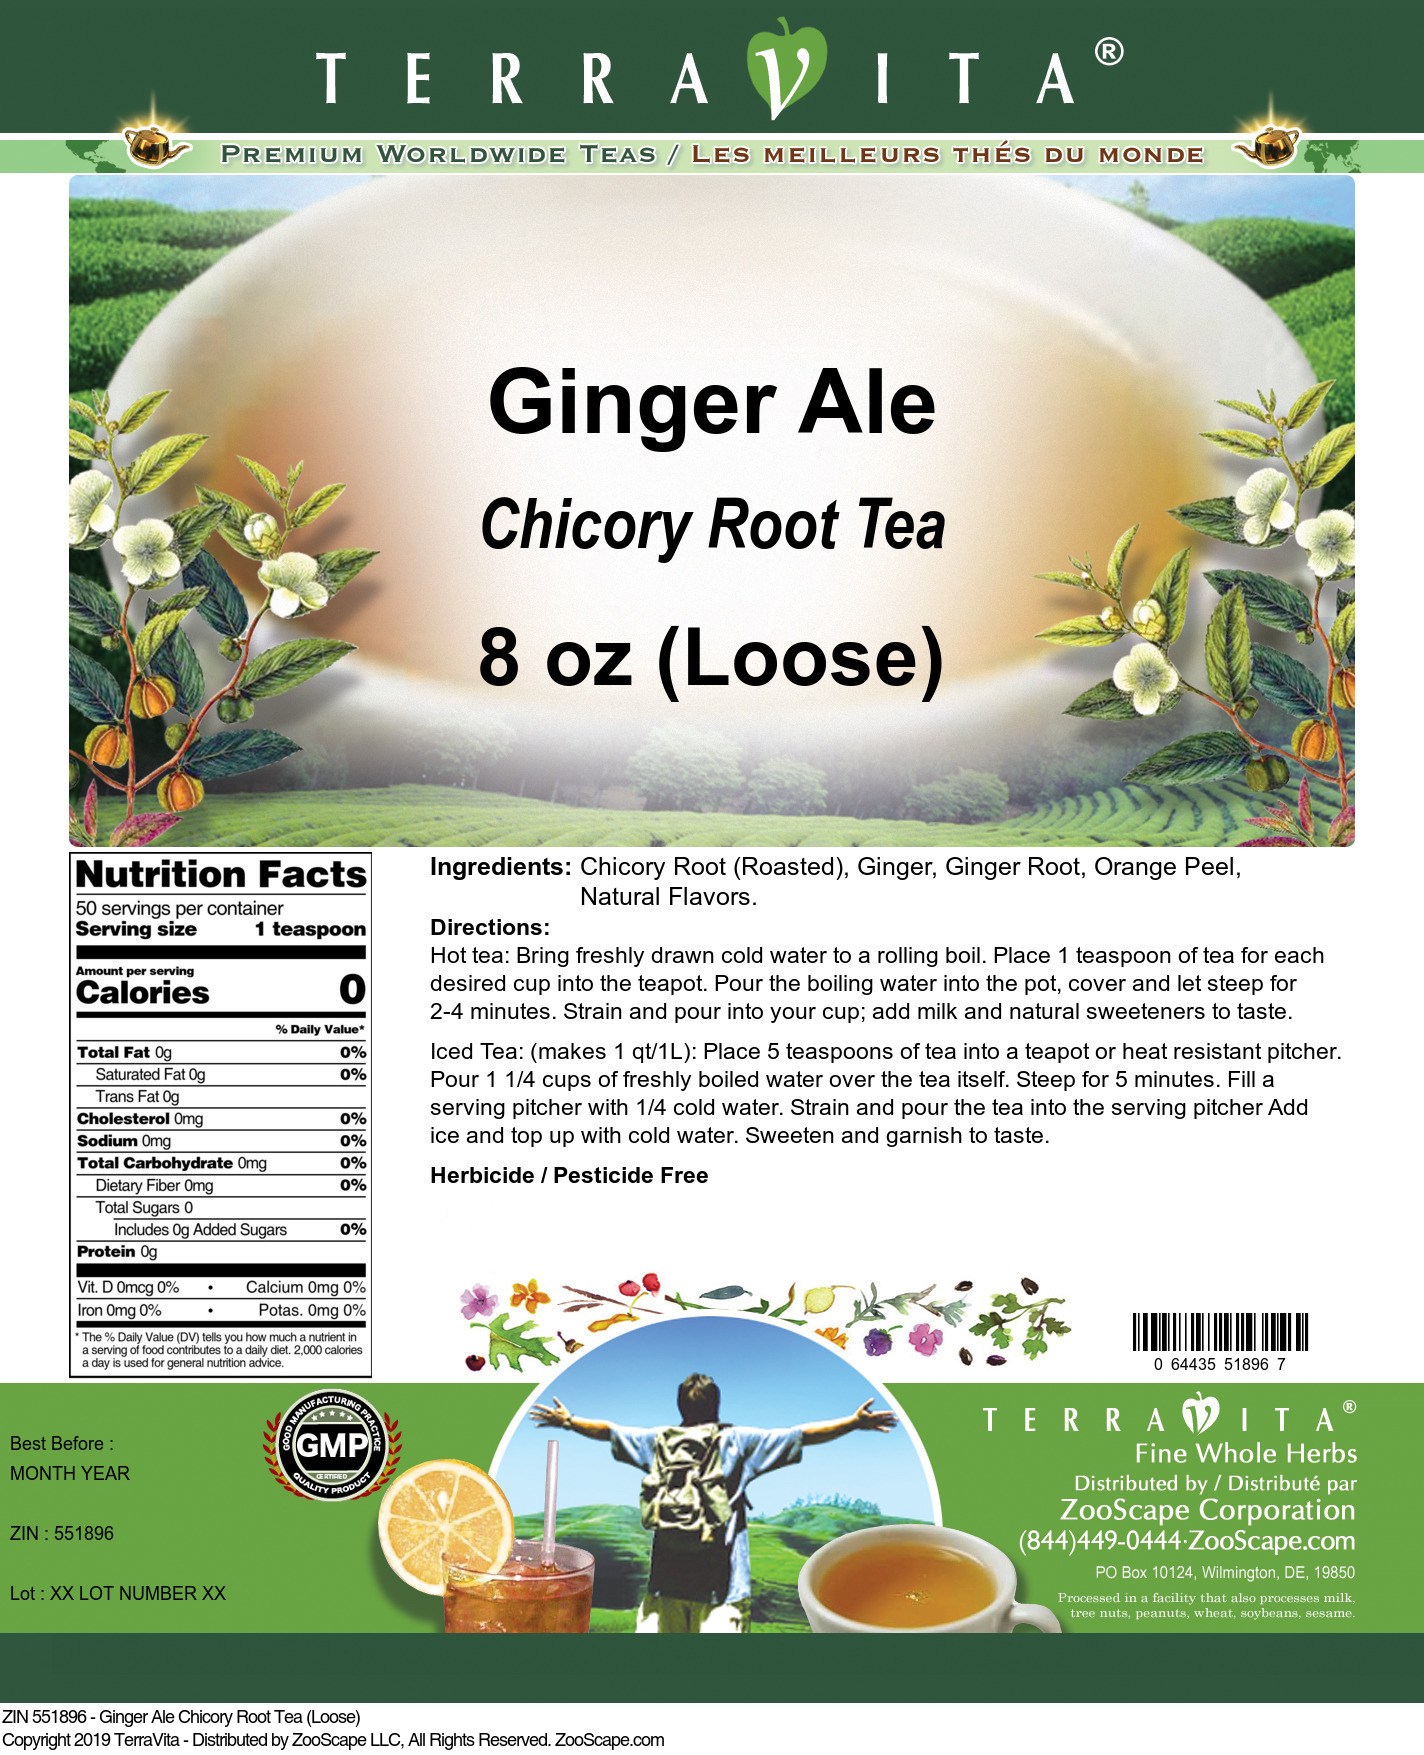 Ginger Ale Chicory Root Tea (Loose) - Label